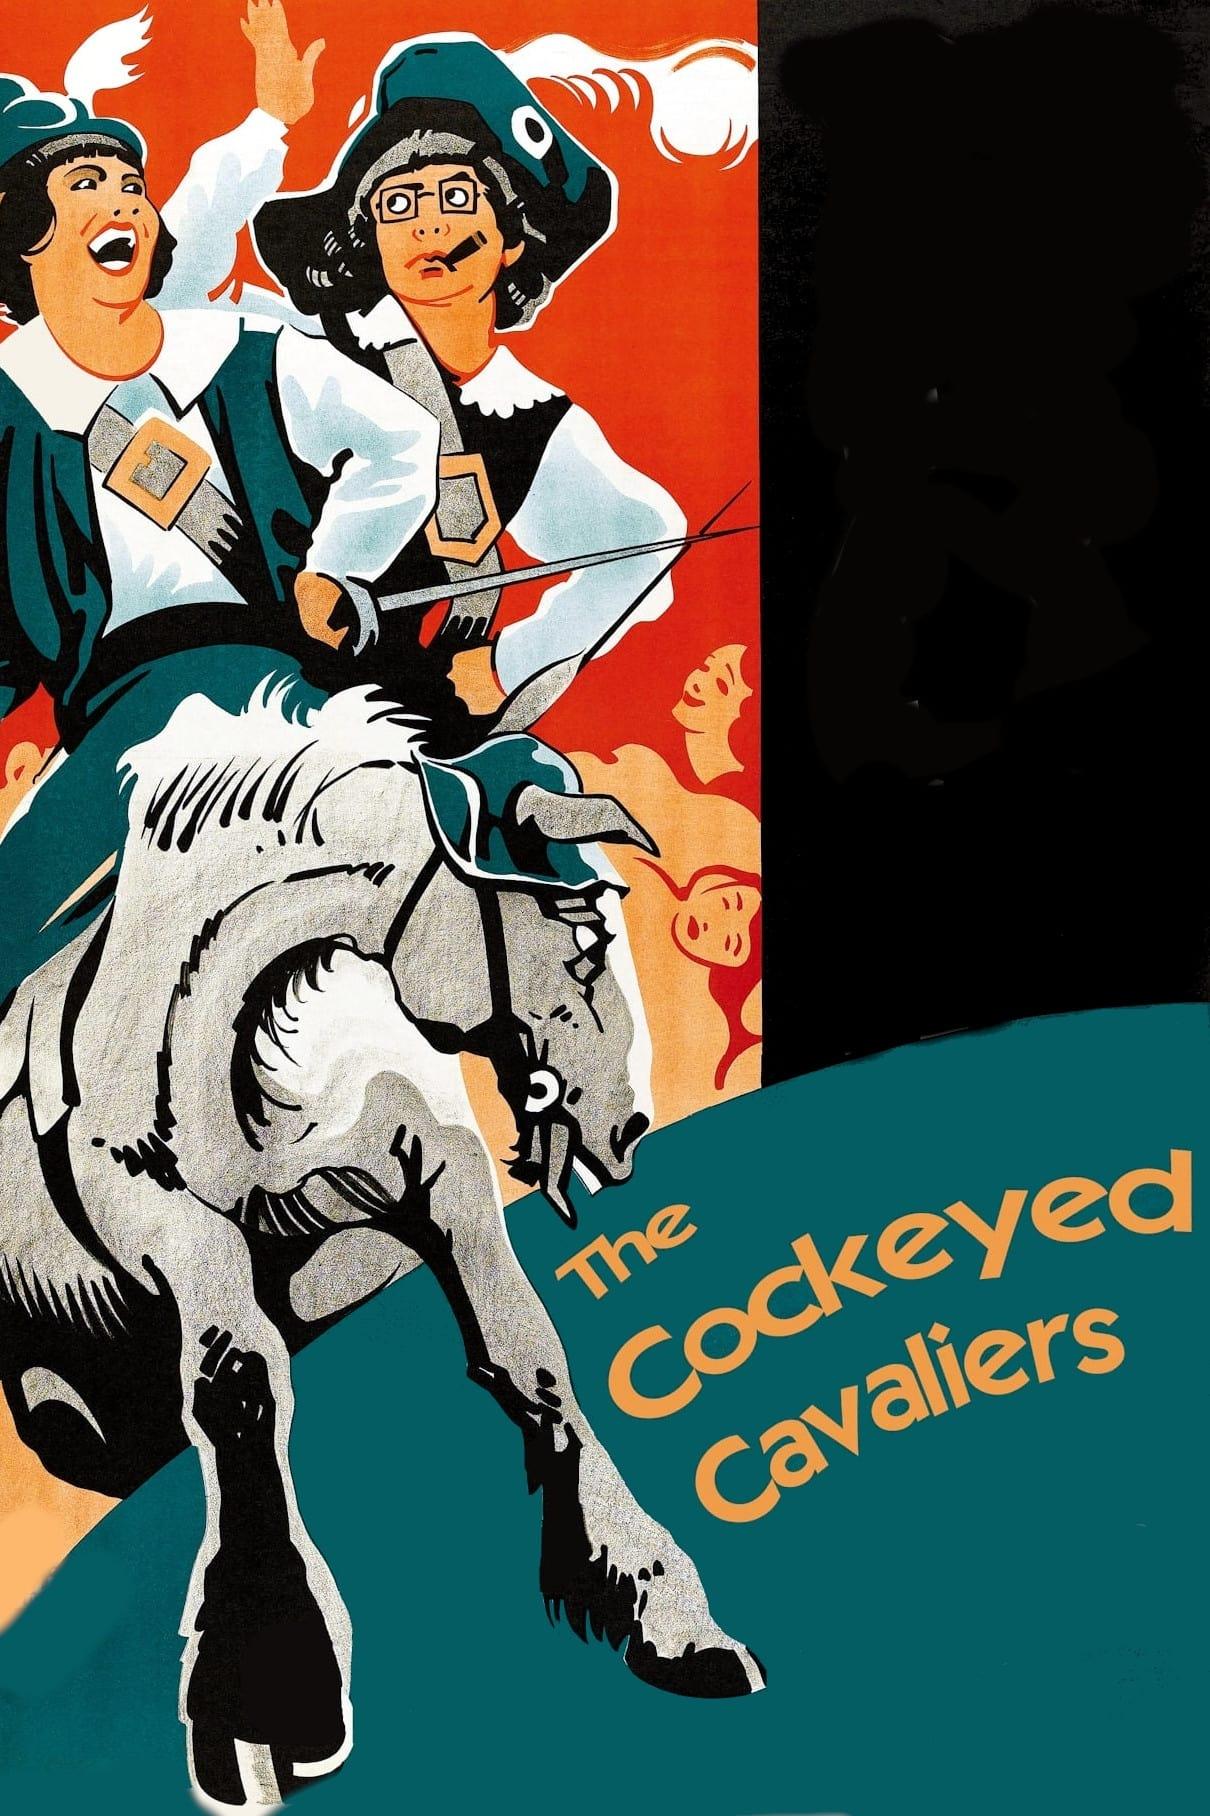 Cockeyed Cavaliers poster